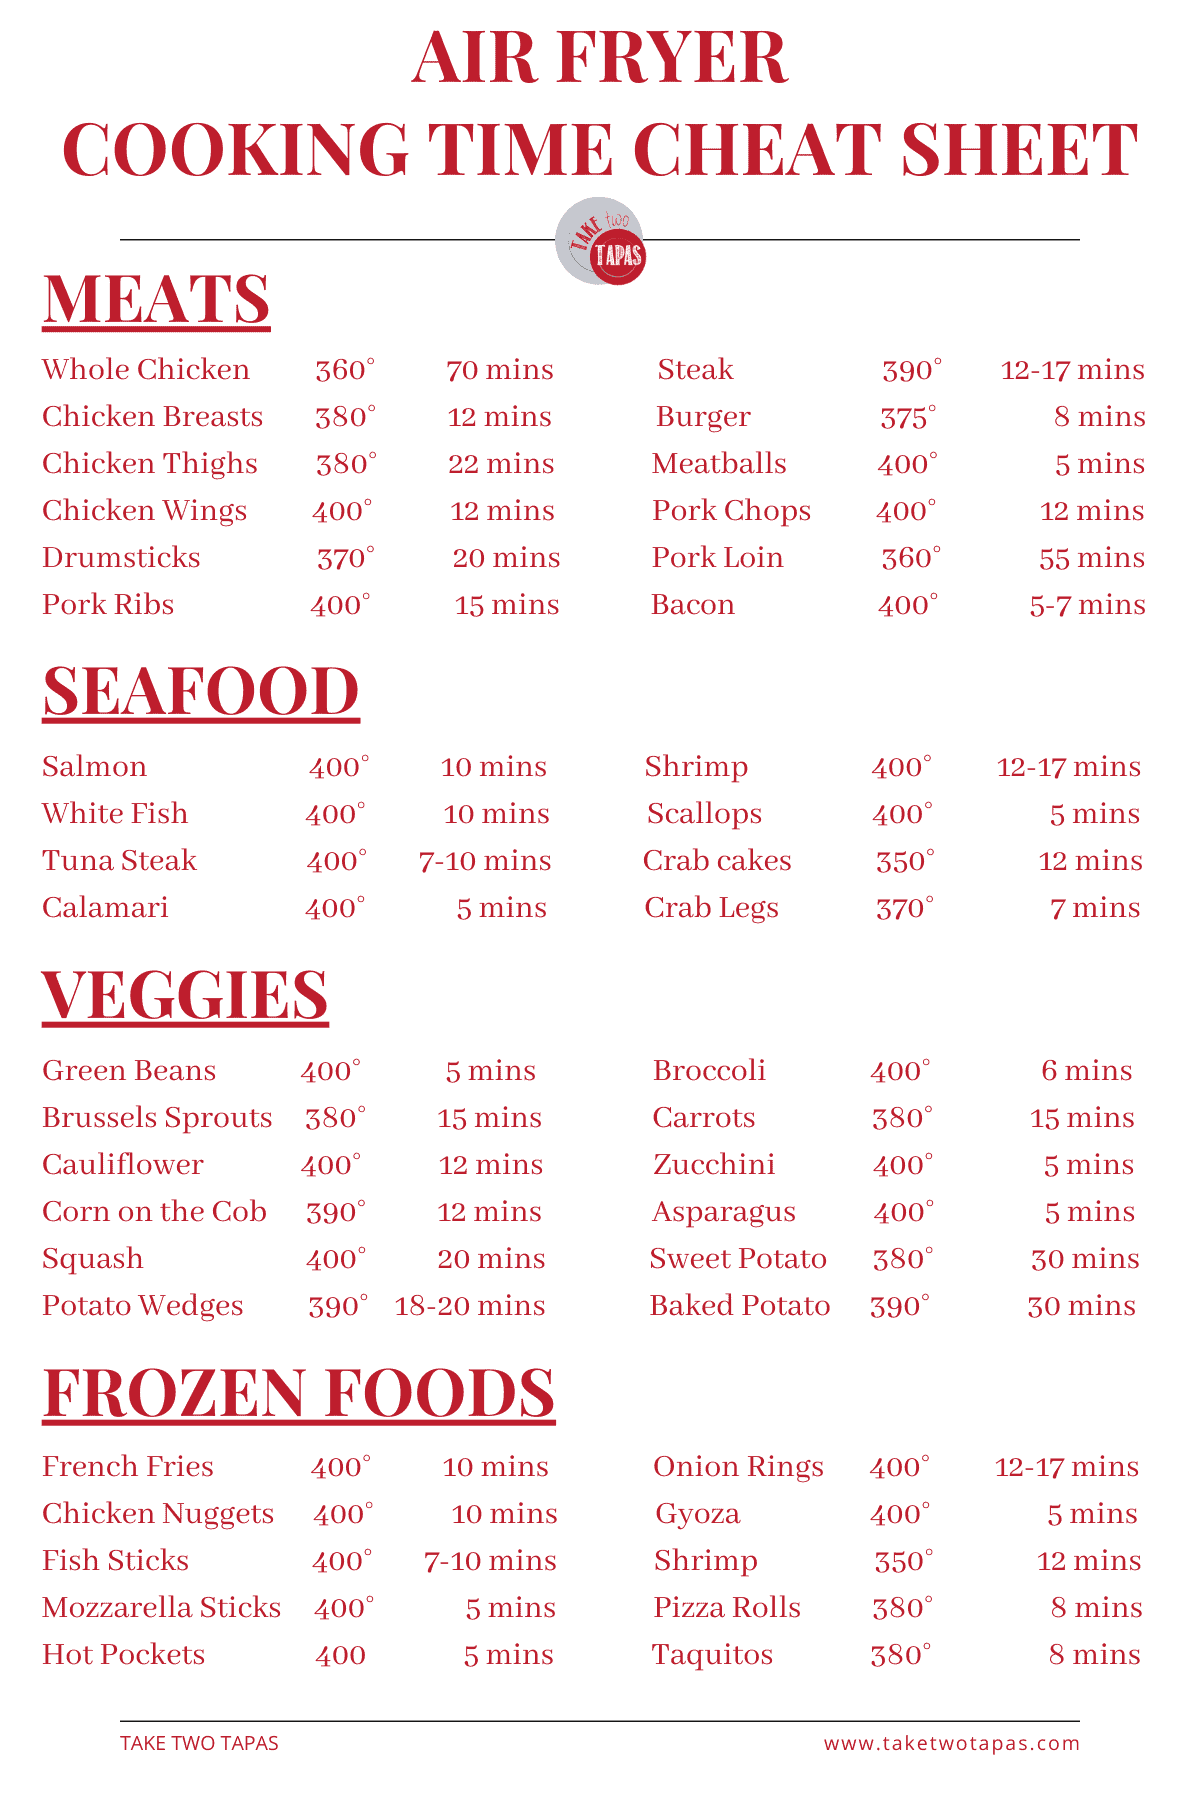 Free Printable Air Fryer Cooking Times Chart Steve - vrogue.co